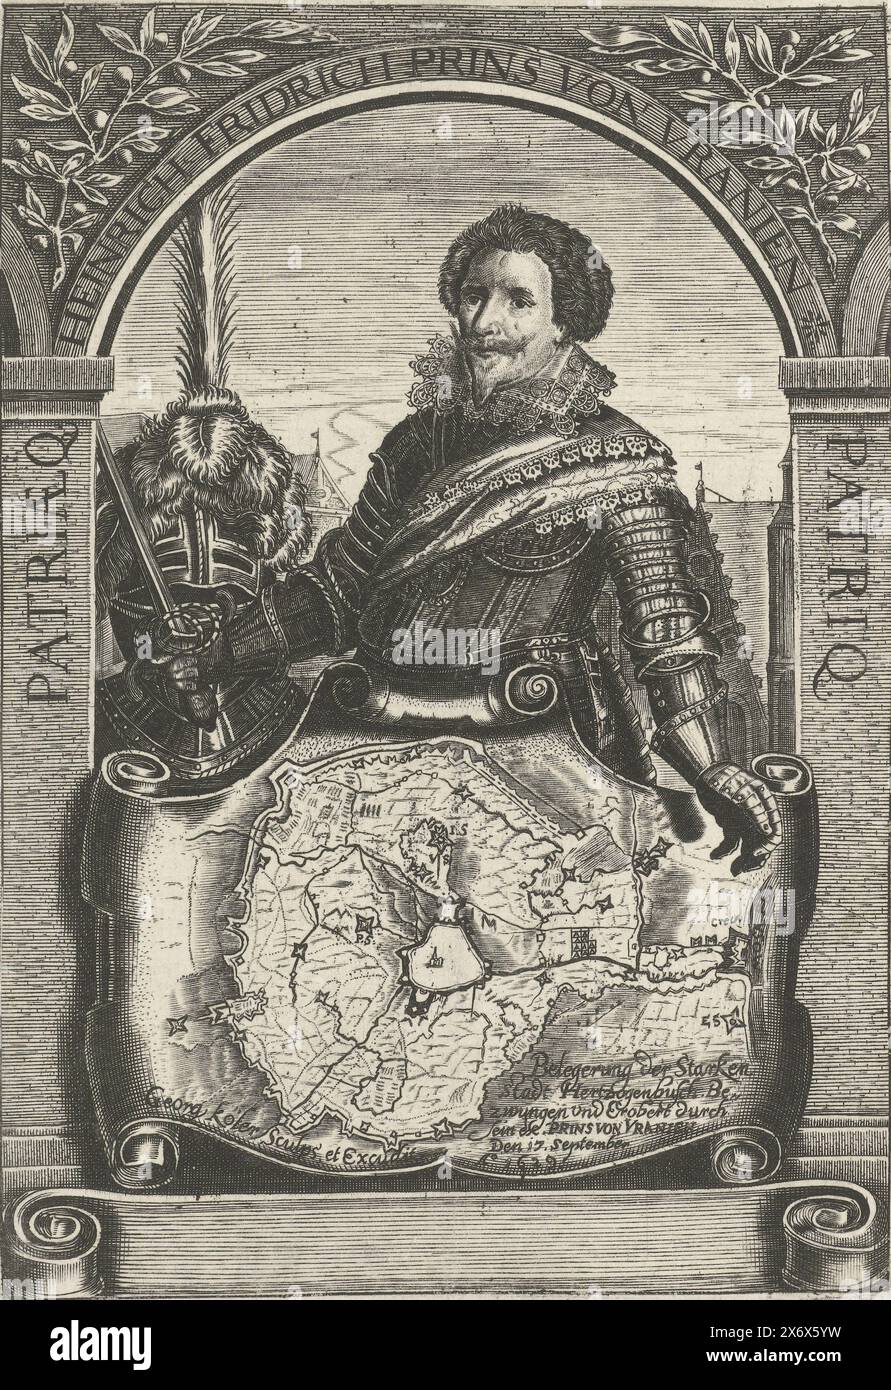 Portrait of Frederik Hendrik with a map of the siege of Den Bosch in 1629, Heinrich Fridrich Prins von Uranien (title on object), Portrait of Frederik Hendrik in half, standing in armor behind a map of the siege of Den Bosch in 1629., print, print maker: Georg Cöler, (mentioned on object), publisher: Georg Cöler, (mentioned on object), Germany, 1629, paper, engraving, height, 170 mm × width, 118 mm Stock Photo